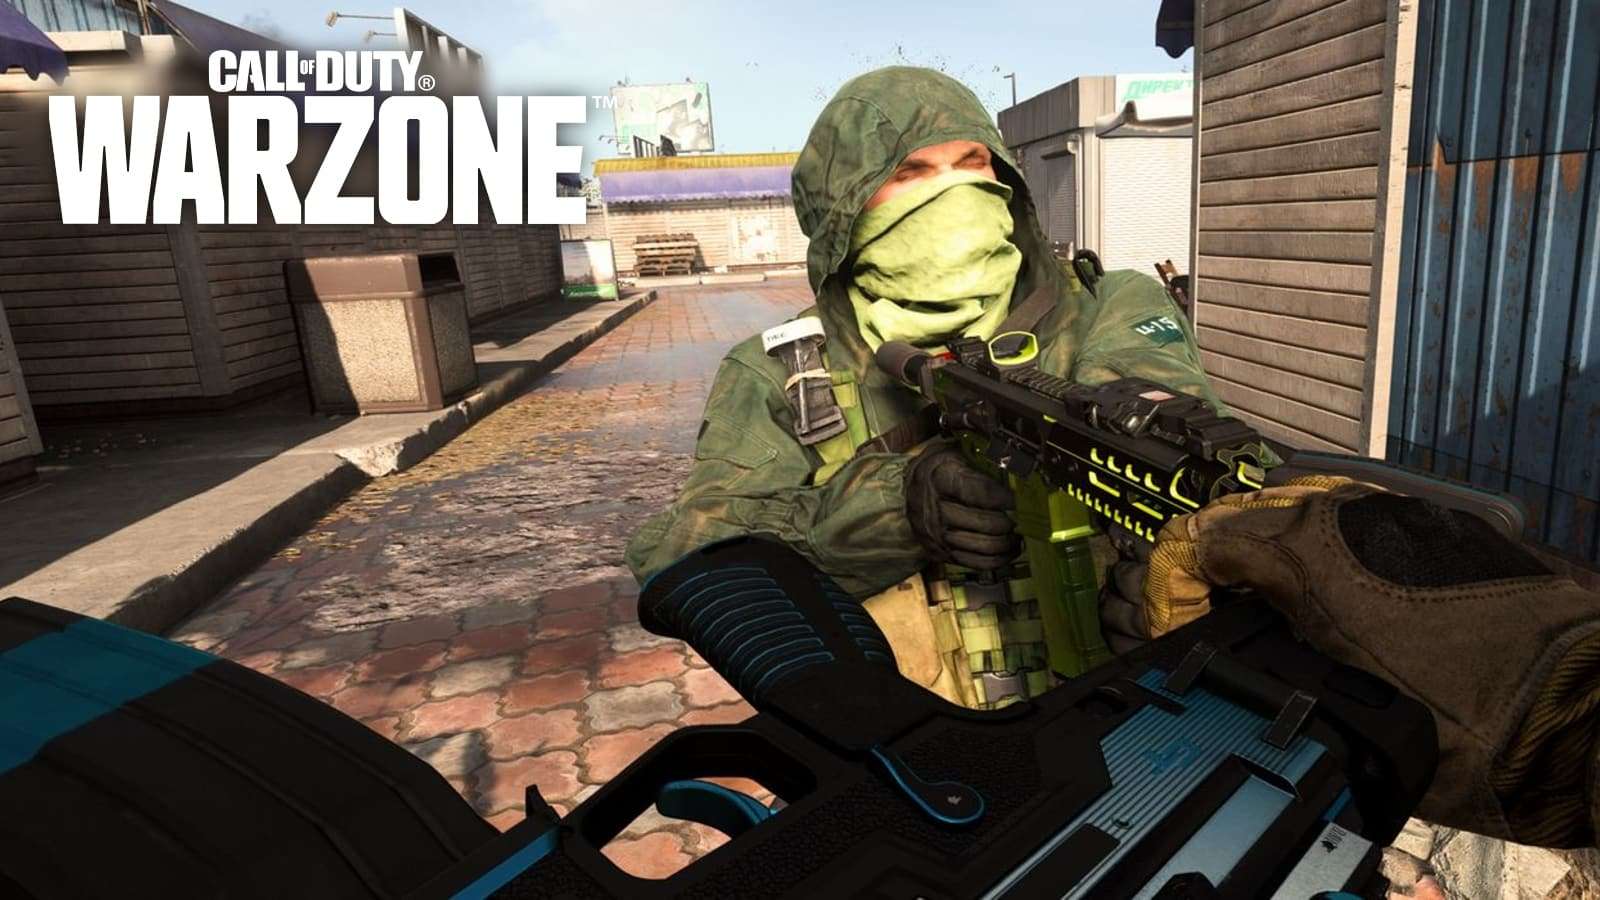 Warzone melee with Warzone logo